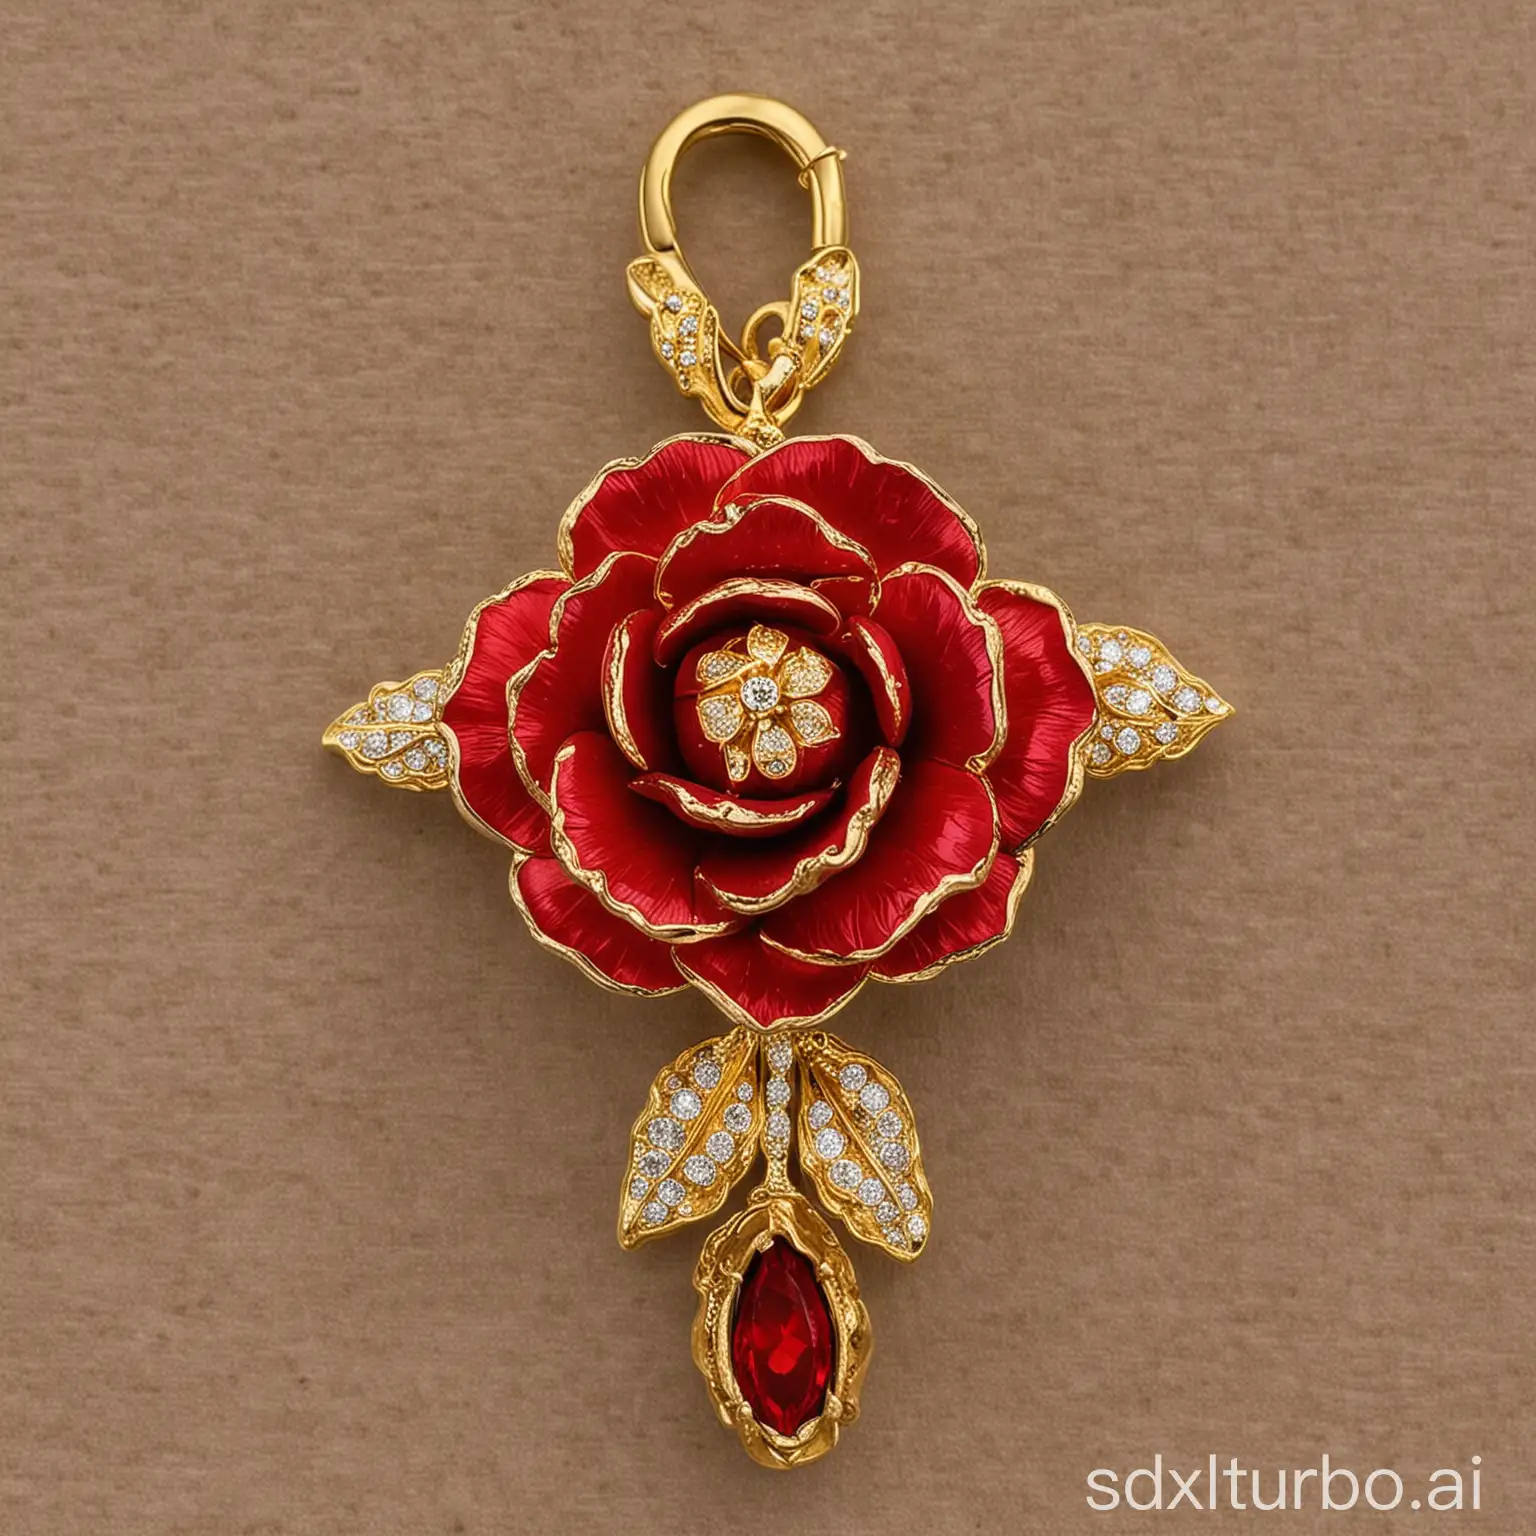 Red-Rose-on-Golden-Jewelry-Exquisite-Floral-Arrangement-atop-Luxurious-Accessories